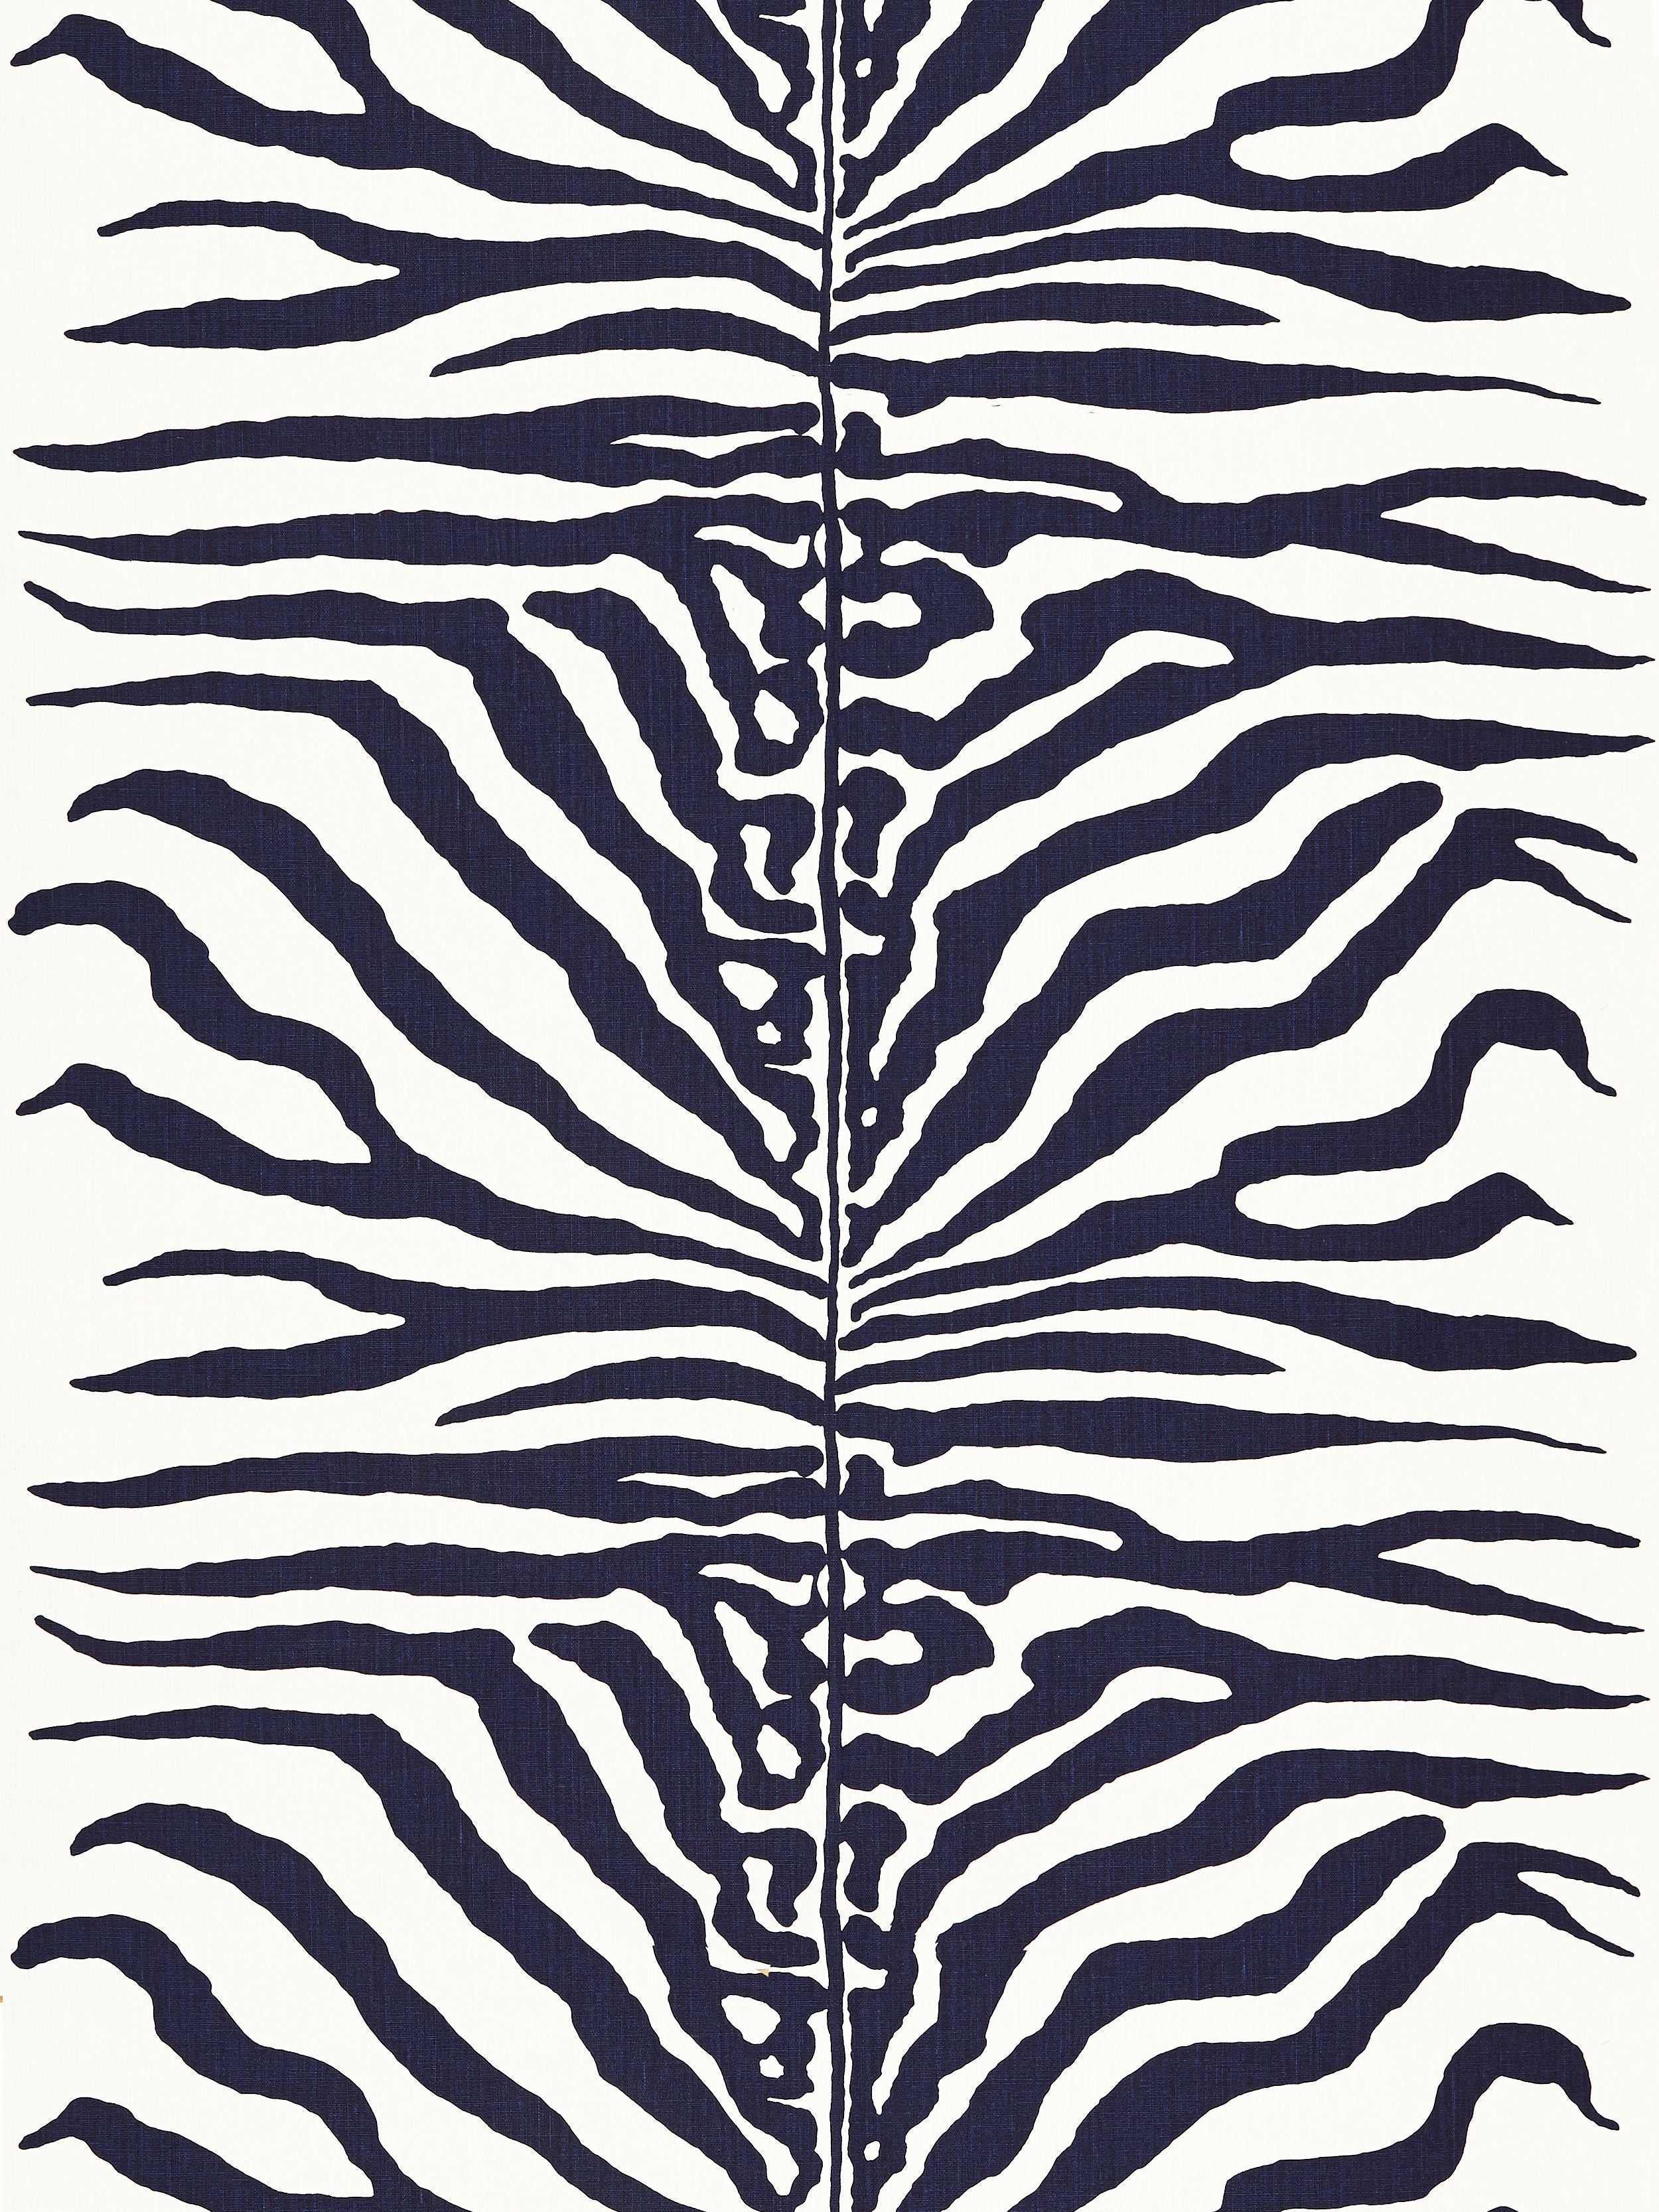 Zebra fabric in navy color - pattern number SC 000416366M - by Scalamandre in the Scalamandre Fabrics Book 1 collection